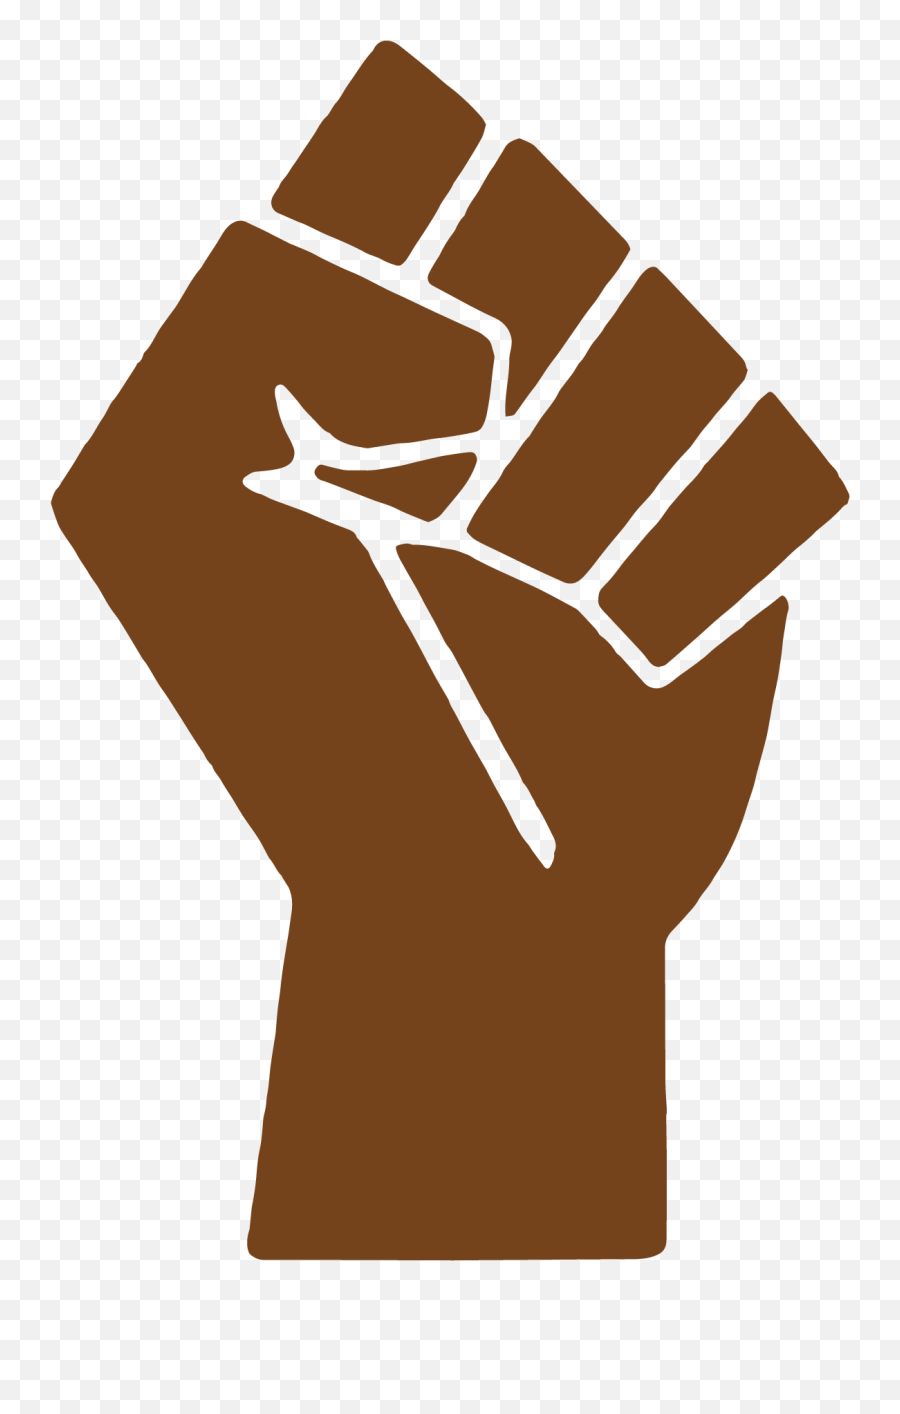 Willie Ou0027ree Skate Release - Black Lives Matter Hand Profile Png,Clenched Fist Icon